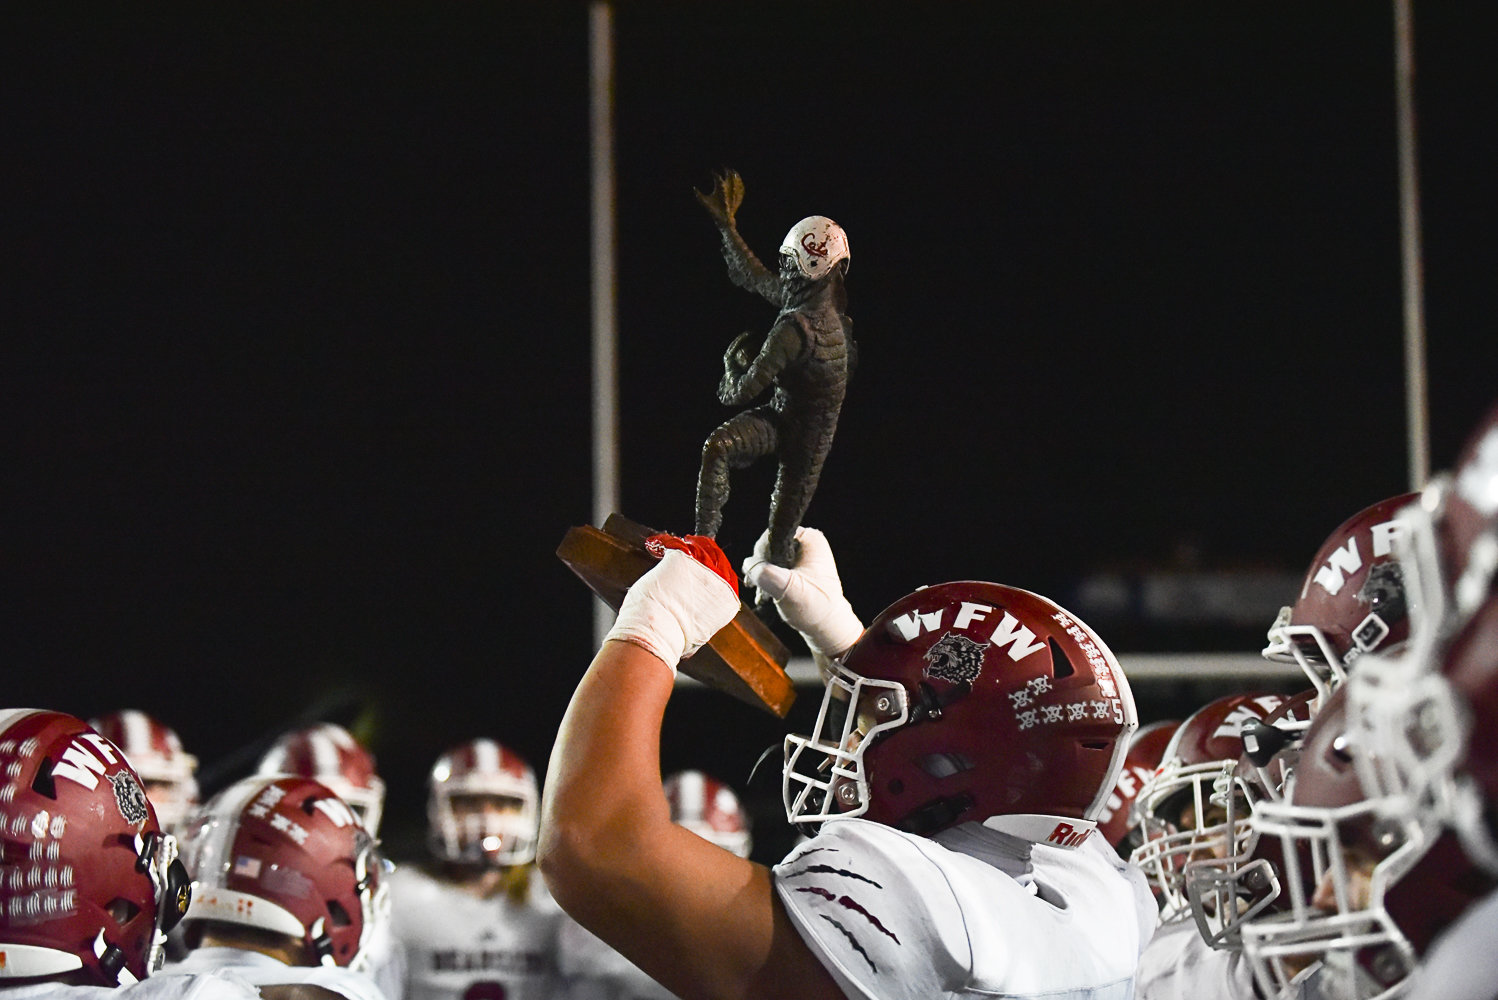 Daniel Matagi holds up the Swamp Cup after W.F. West's 55-7 win over Centralia at Tiger Stadium on Oct. 28.